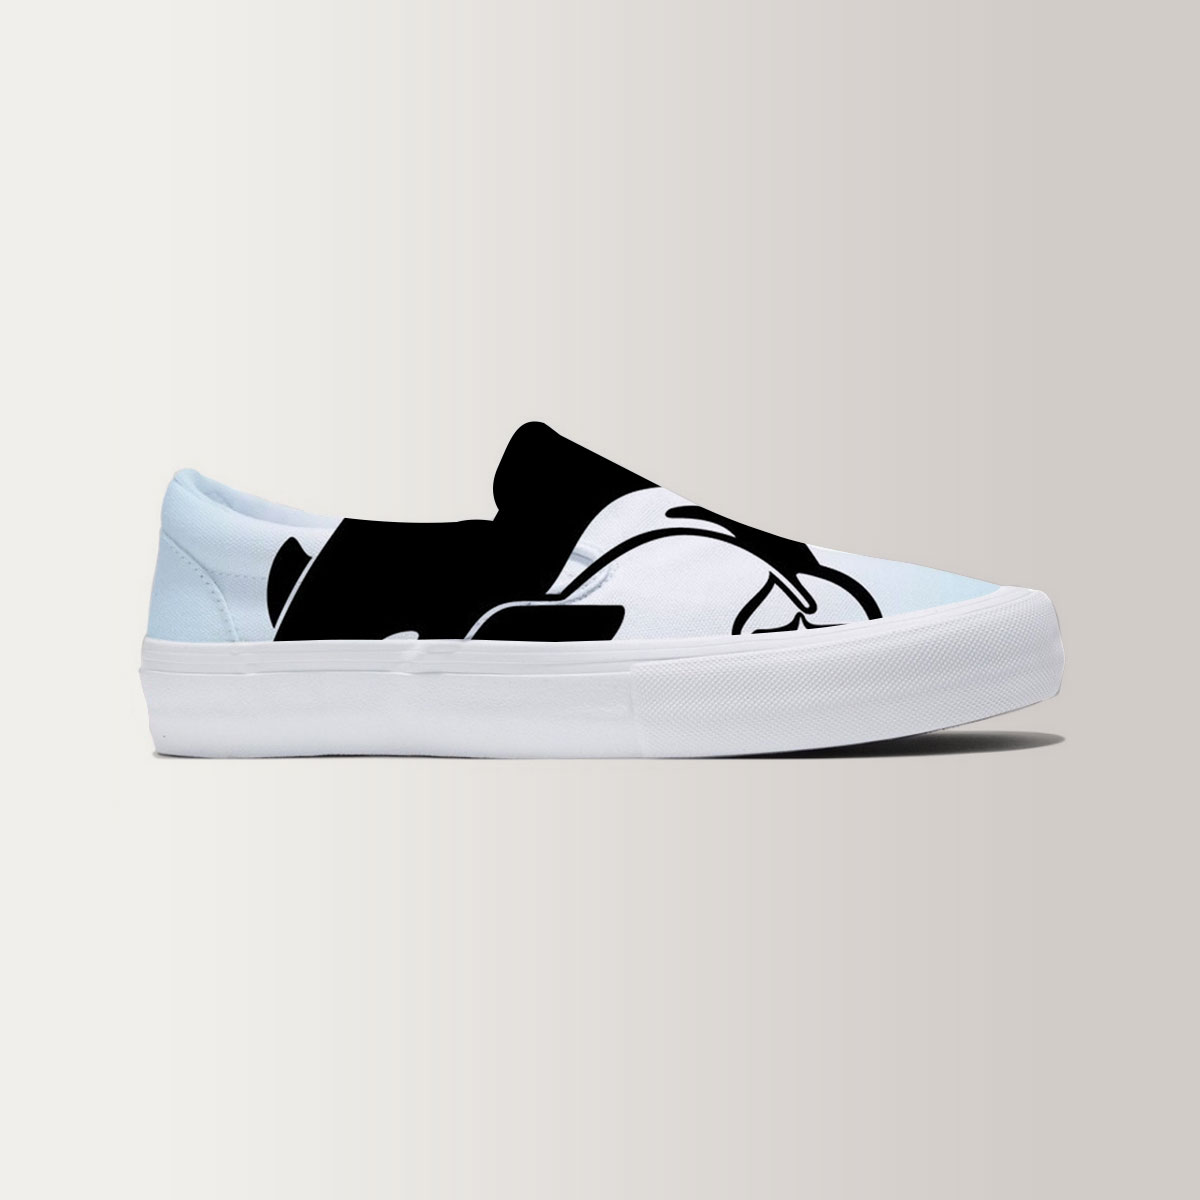 Jumping Orca Slip On Sneakers